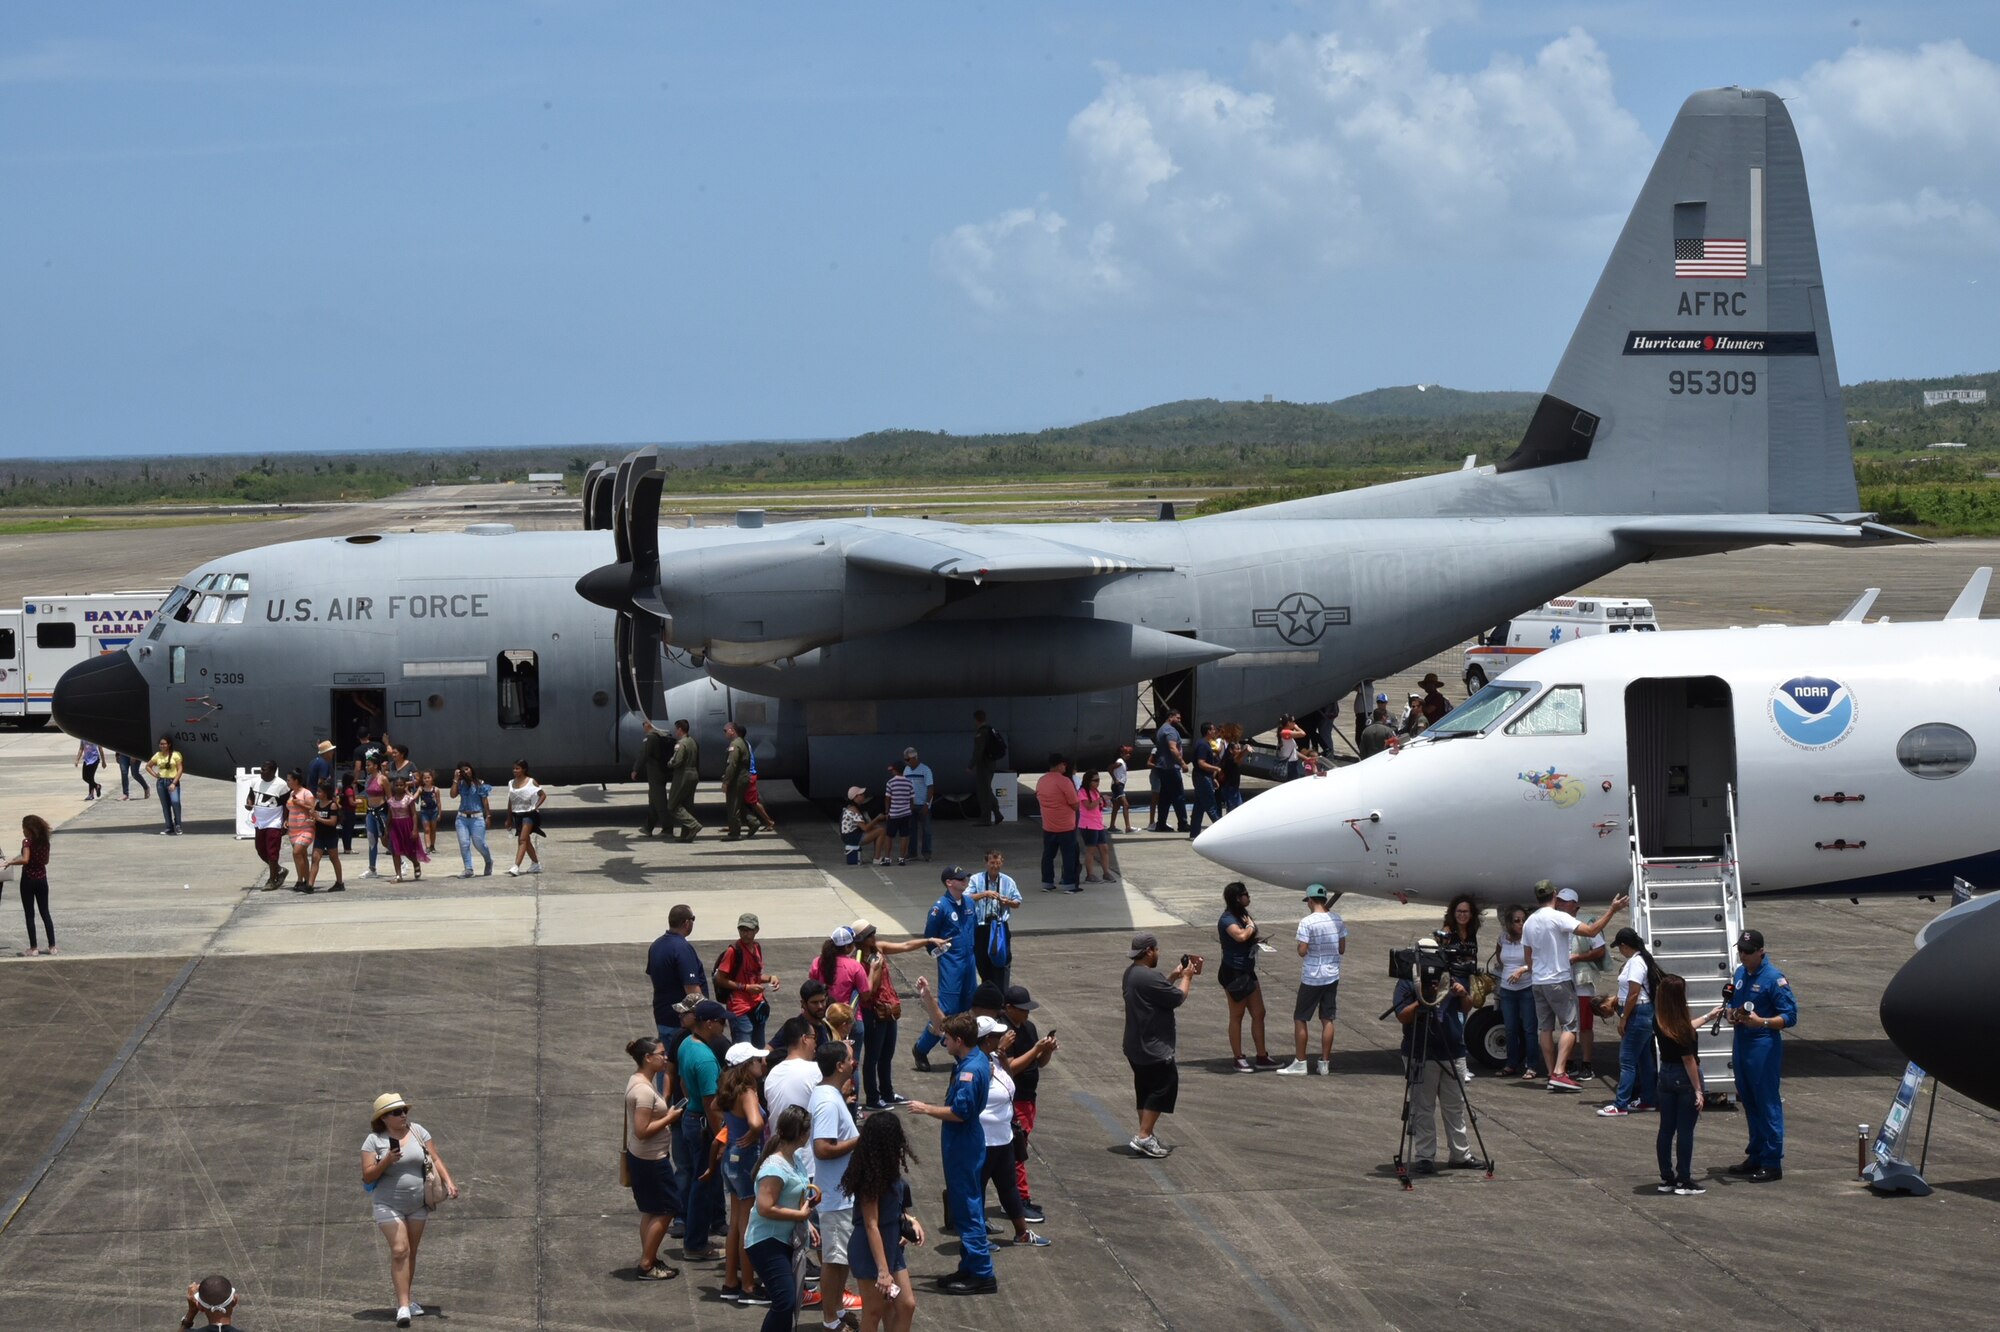 The 53rd Weather Reconnaissance Squadron, also known as the Air Force Reserve Hurricane Hunters, and the National Oceanic and Atmospheric Administration hosts the 2018 Caribbean Hurricane Awareness Tour, April 23-28. The tour is designed to help communities in Mexico and the Caribbean prepare for the season and the coming storms. Visitors toured a WC-130J Super Hercules hurricane hunter aircraft and the NOAA Gulfstream IV. (U.S. Air Force photo by Master Sgt. Jessica Kendziorek)